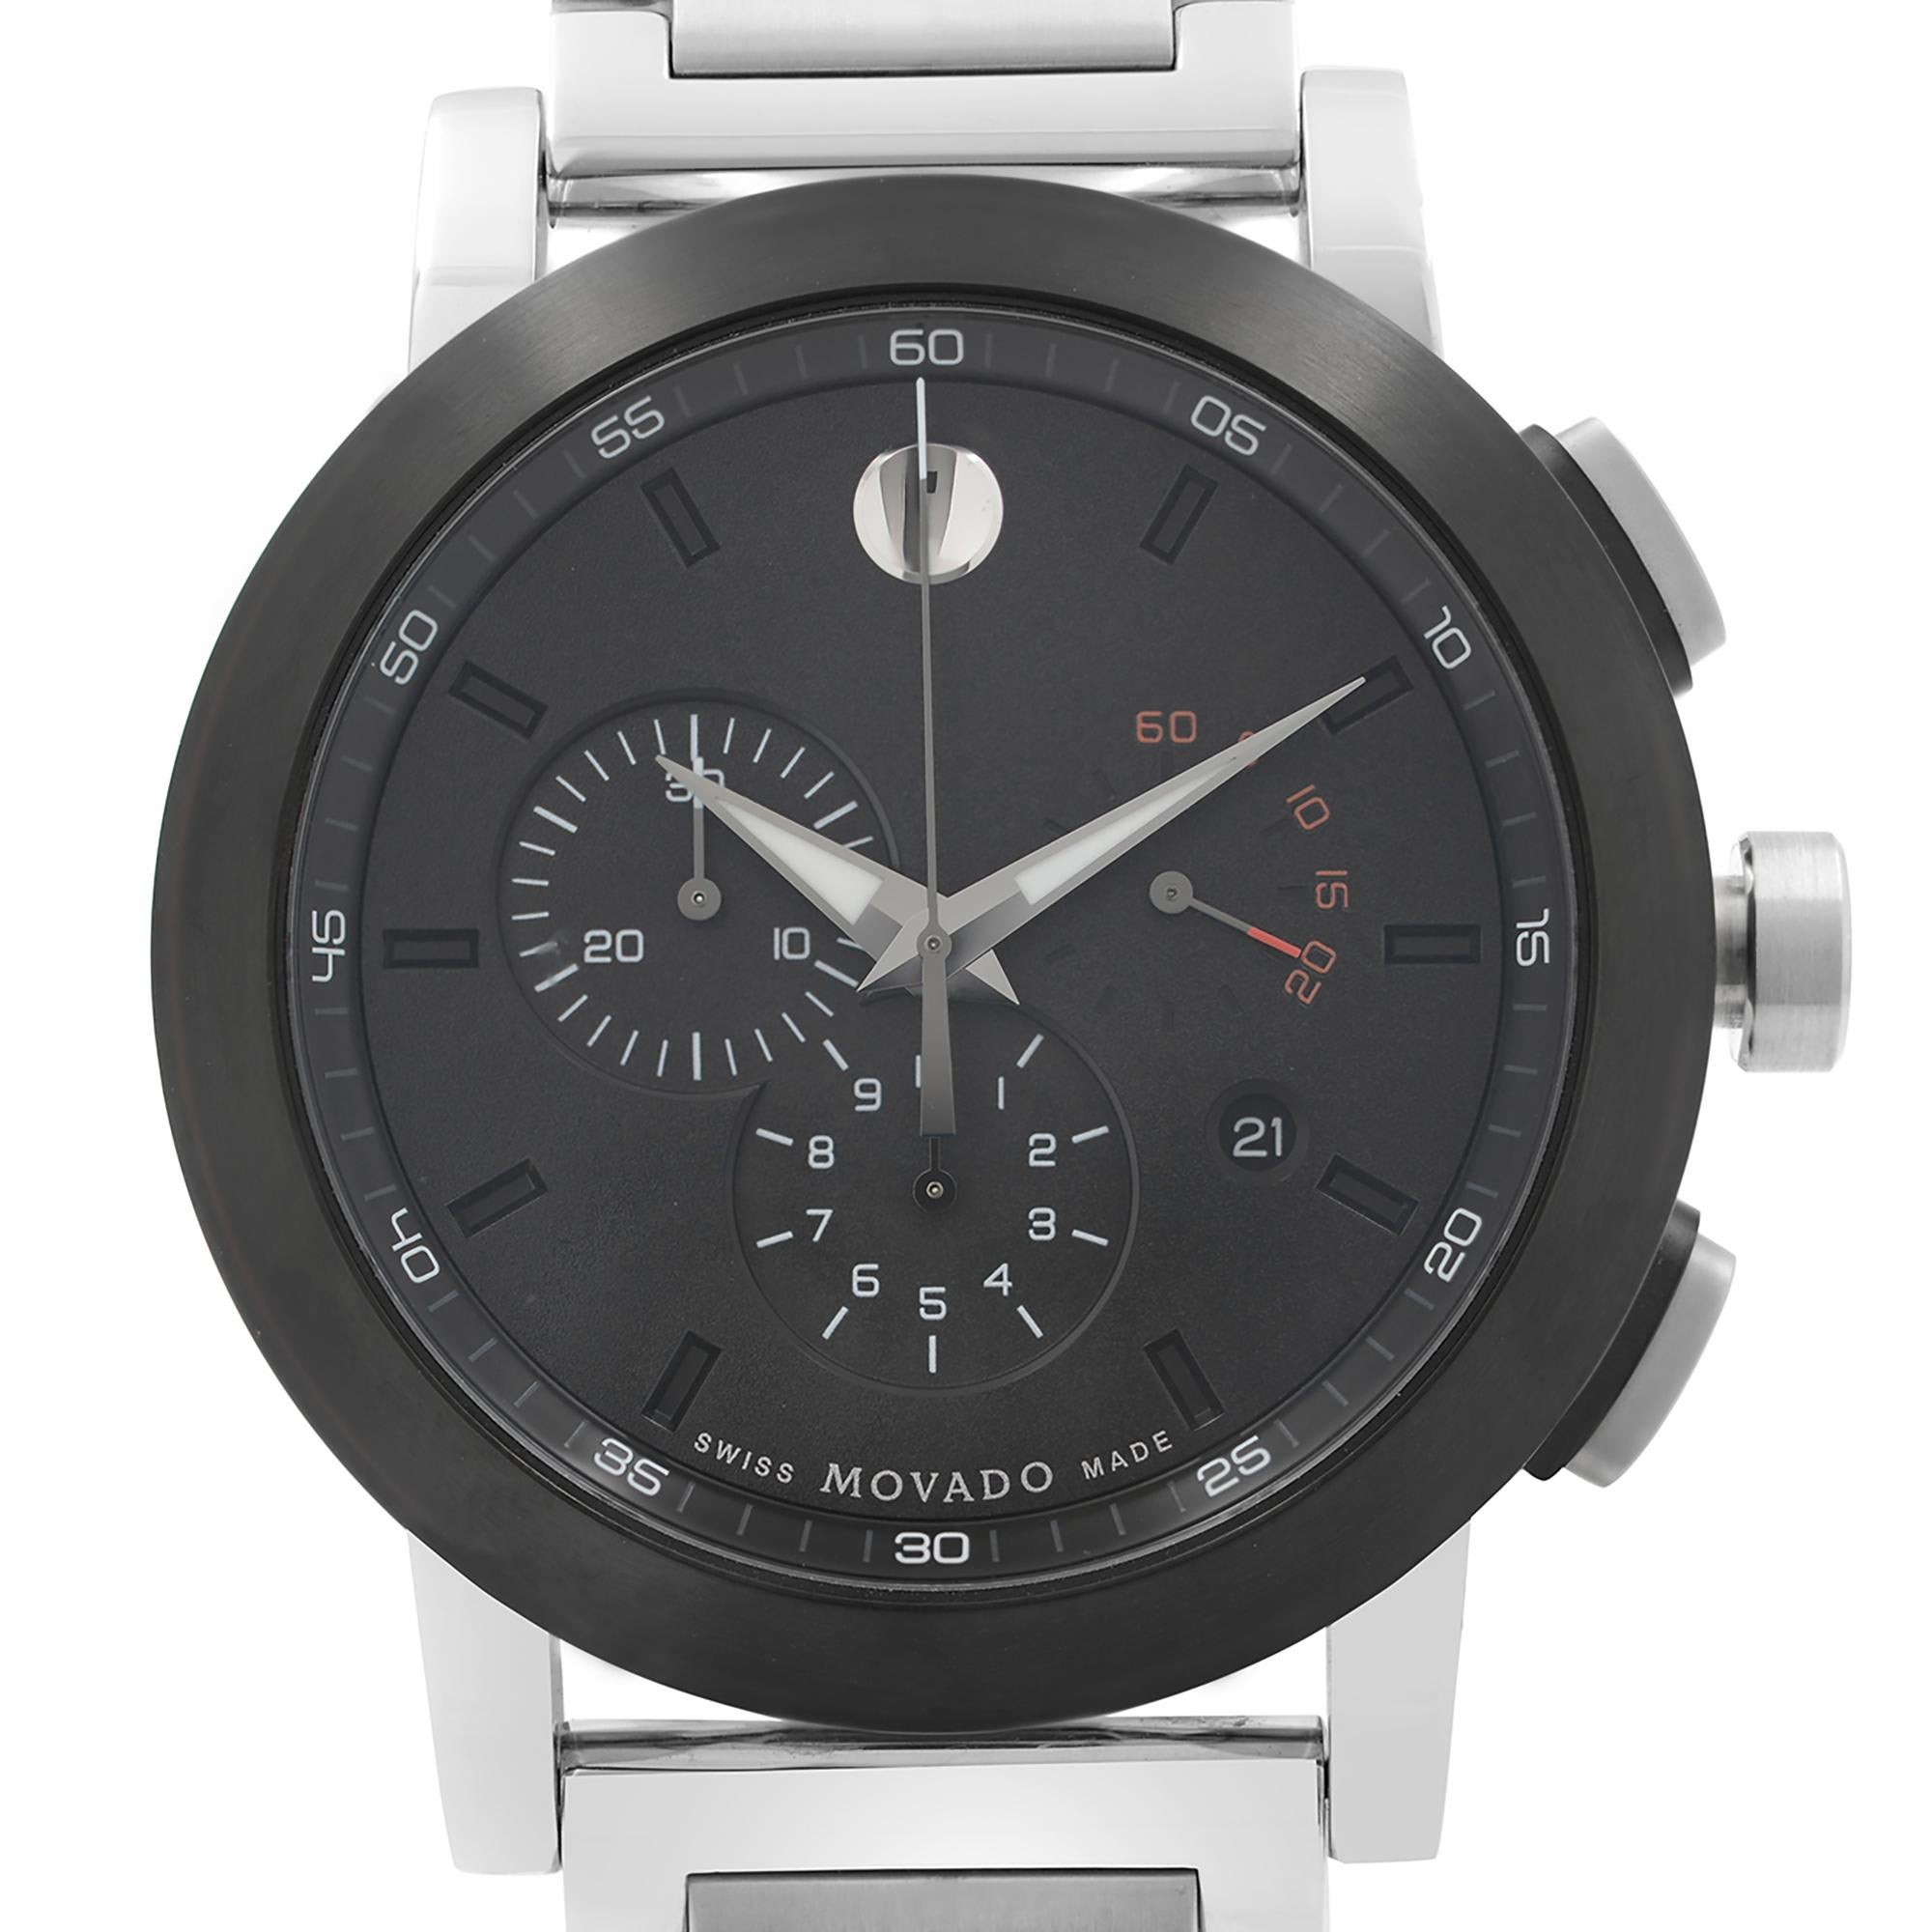 New With Defects Movado Museum Stainless Steel Chronograph Black Dial Quartz Men's Watch 0606792. The Timepiece Might Have Either Minor Scratches on the Case Back or Insignificant Blemishes on the Bezel. This Beautiful Timepiece Features: Stainless